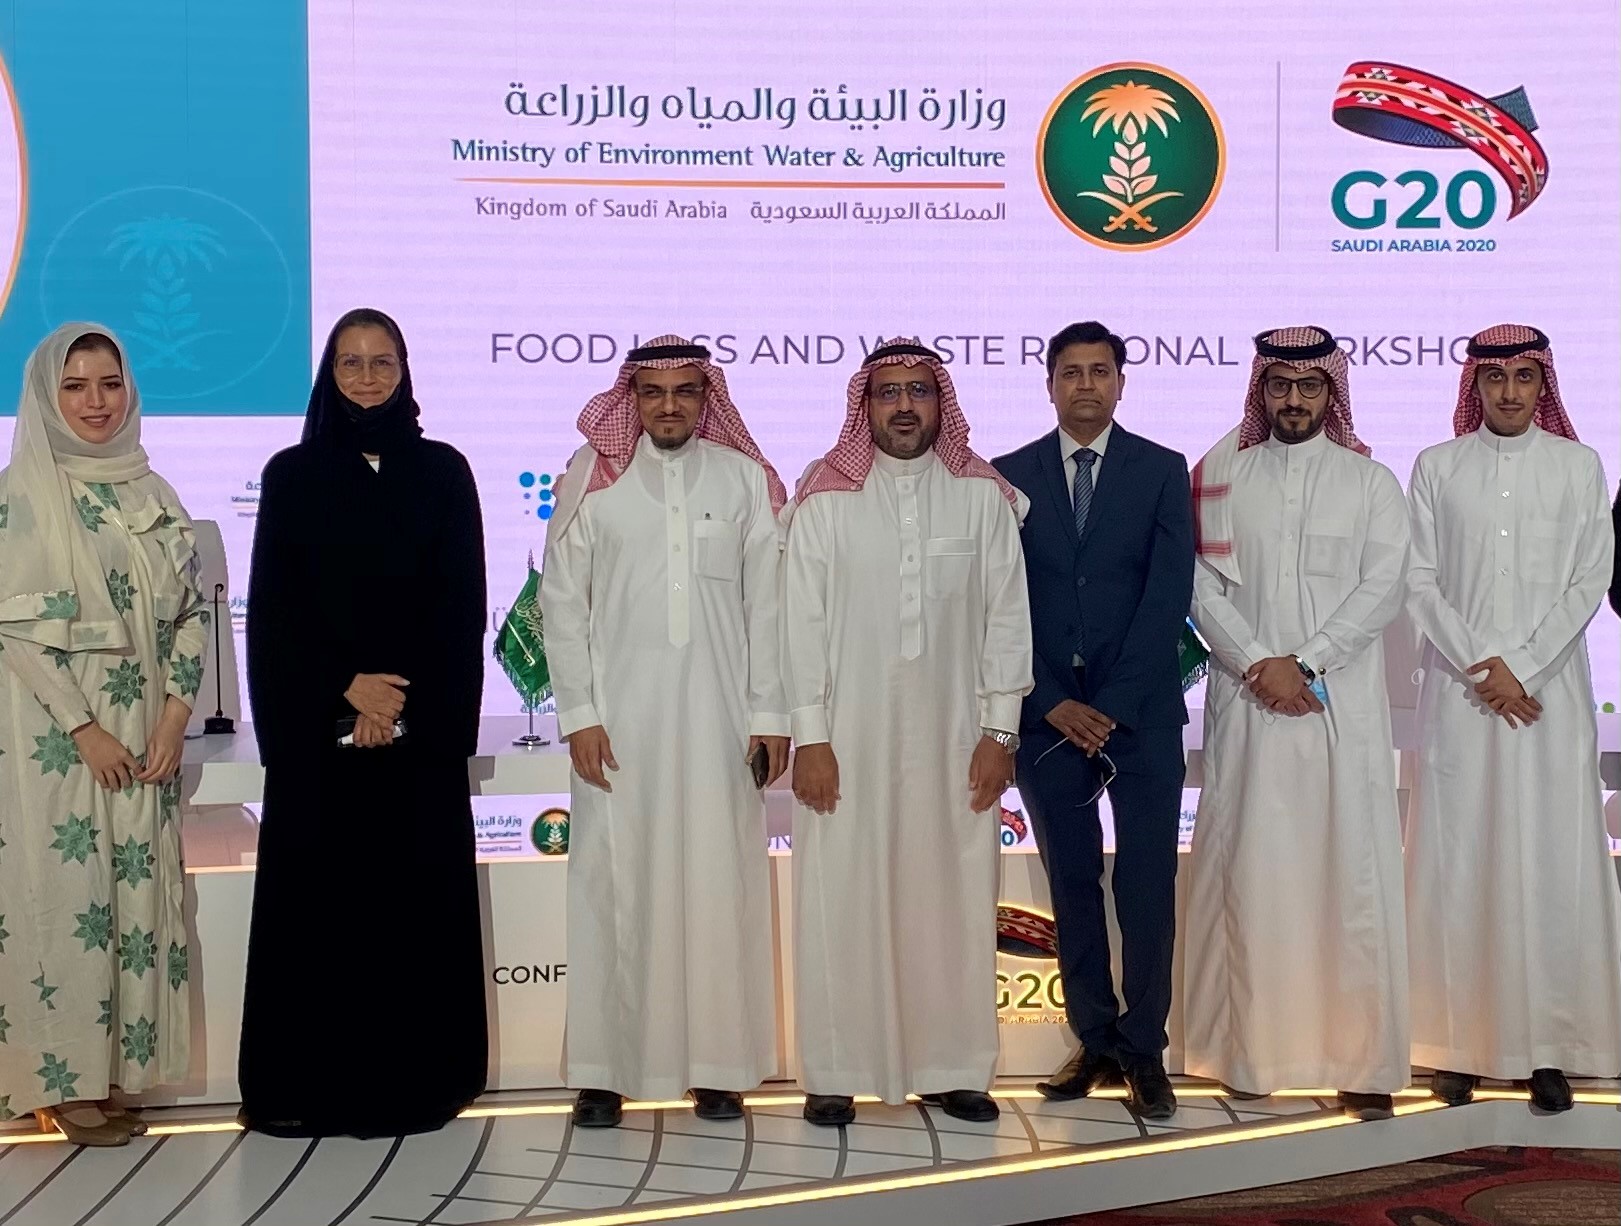 Prof. Suliman Ali Al-Khateeb, Chairperson of the G20- MACS 2020 (3rd on the left), with his team and workshop participants.